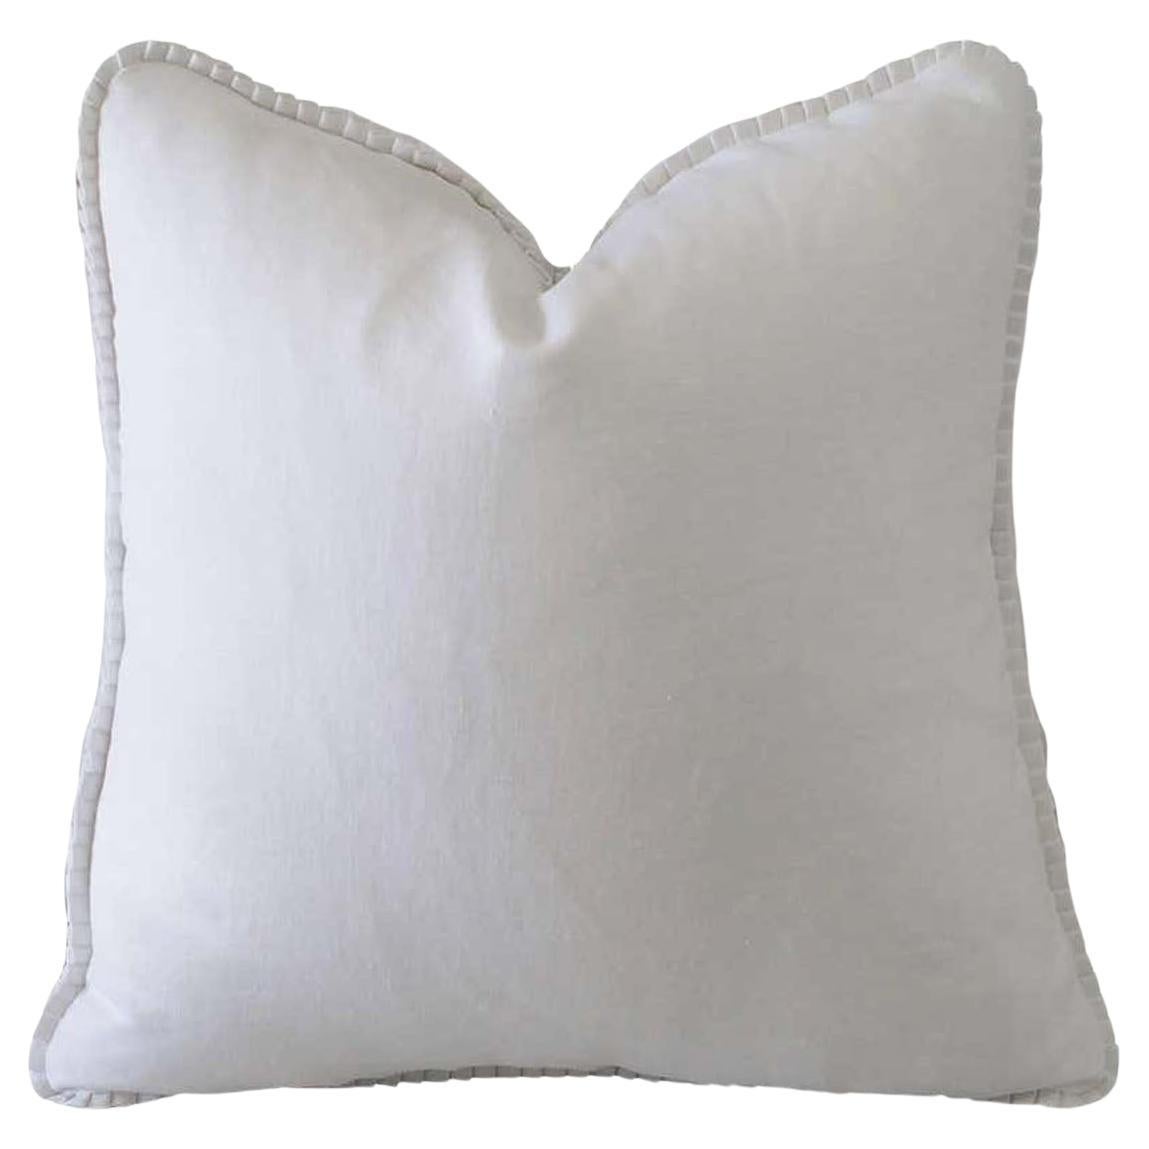 Custom-Made Luxury Linen Pillows with Ruffle For Sale